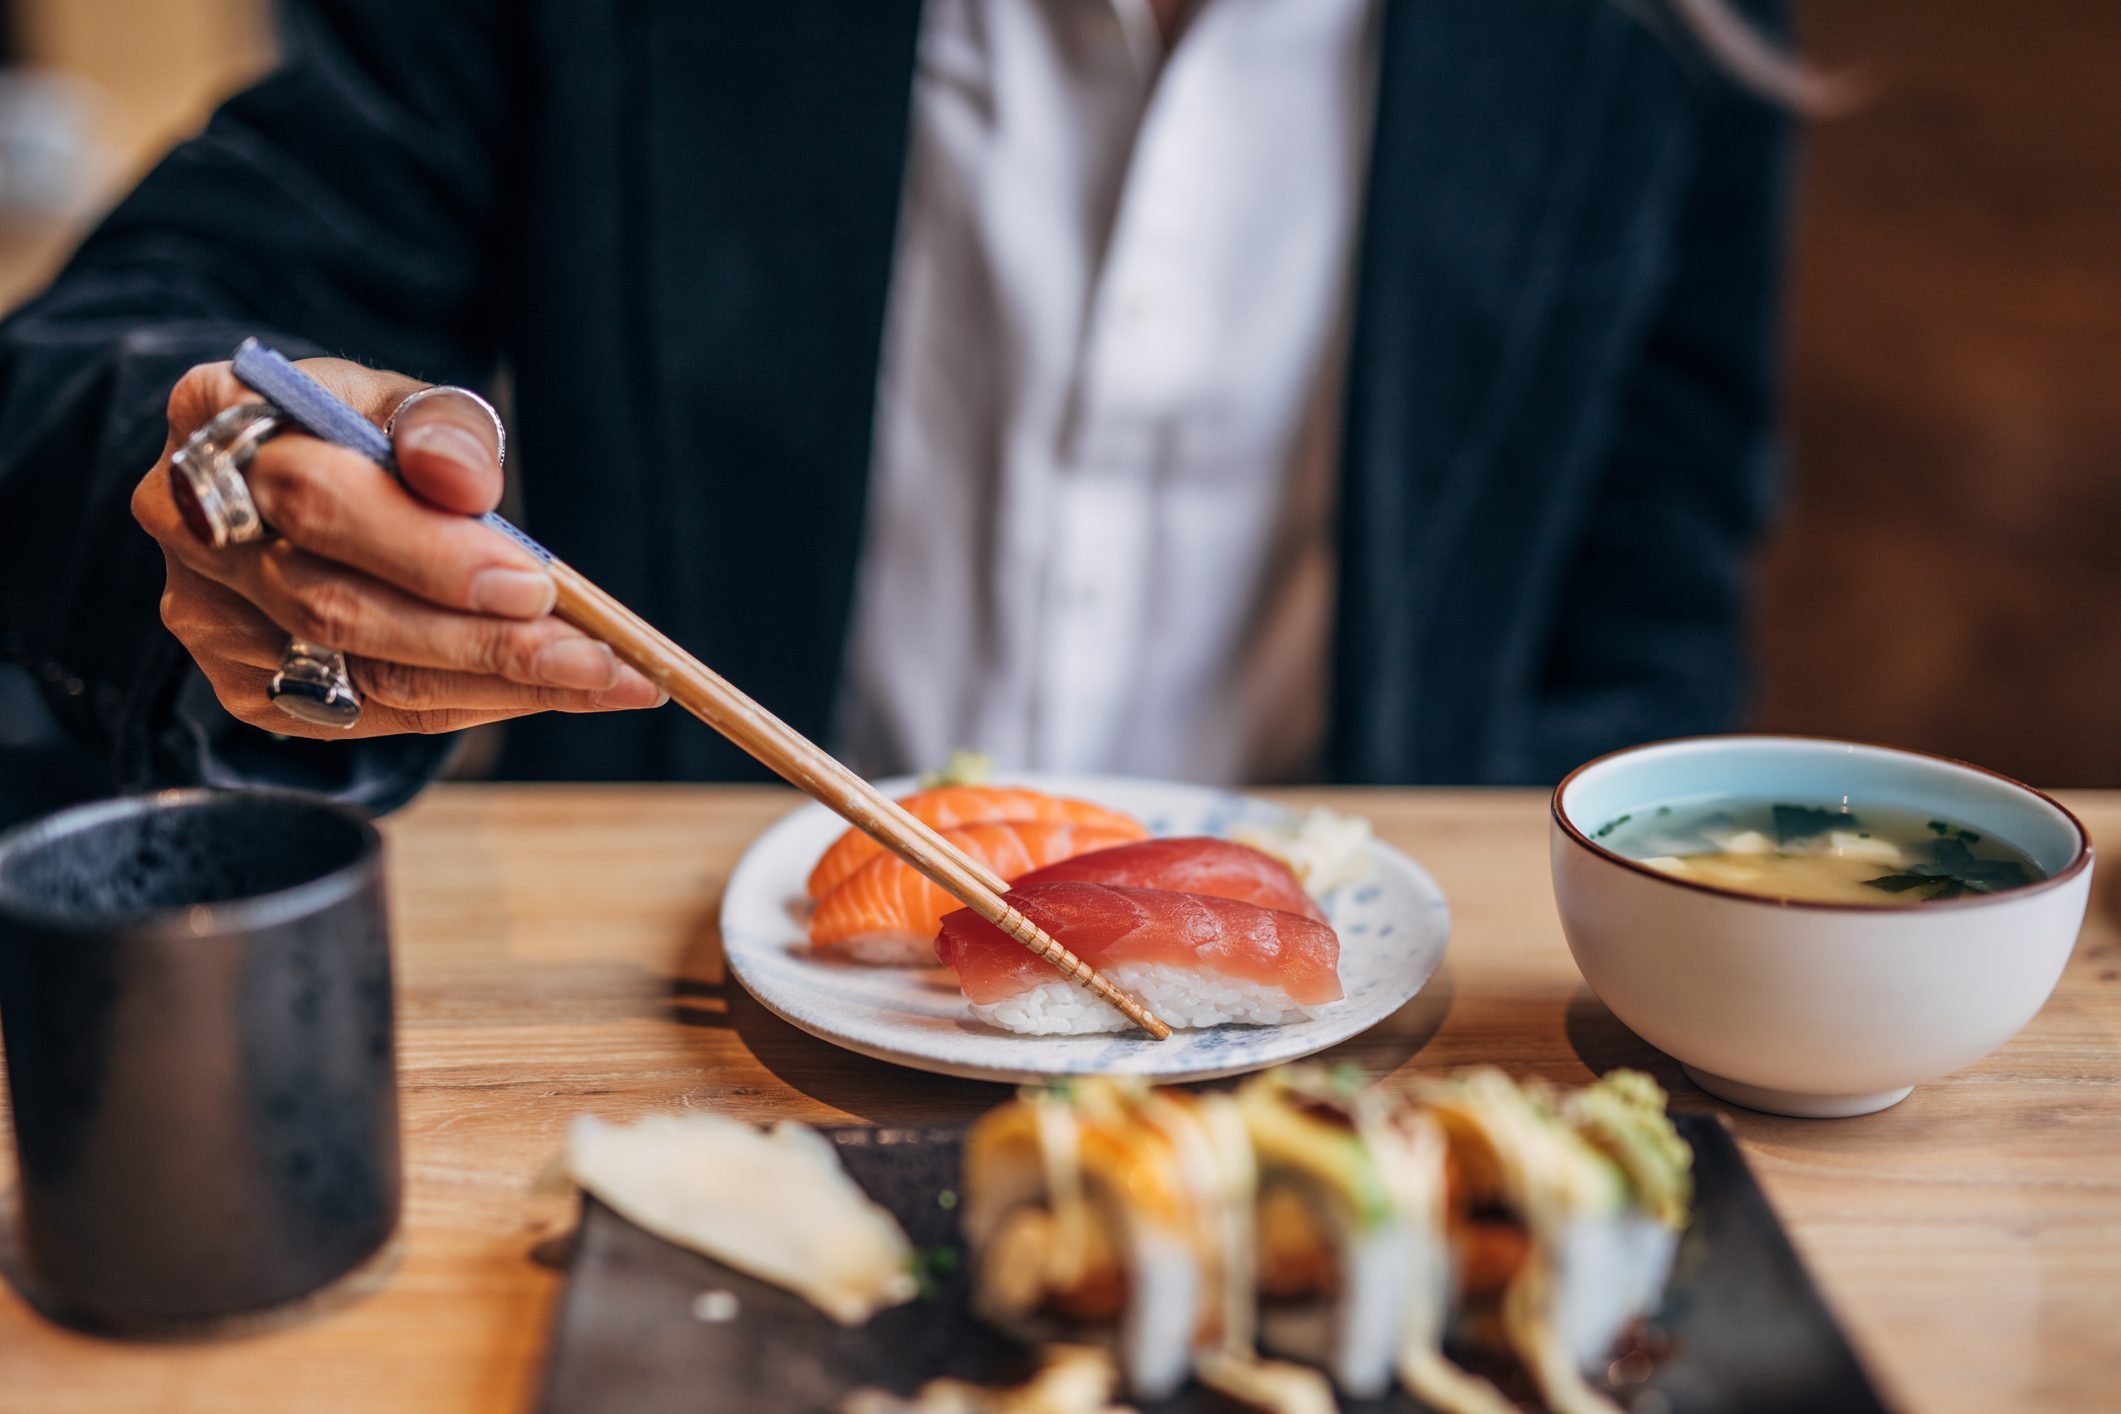 How to Hold Chopsticks: A Quick & Easy Guide to Doing It Right